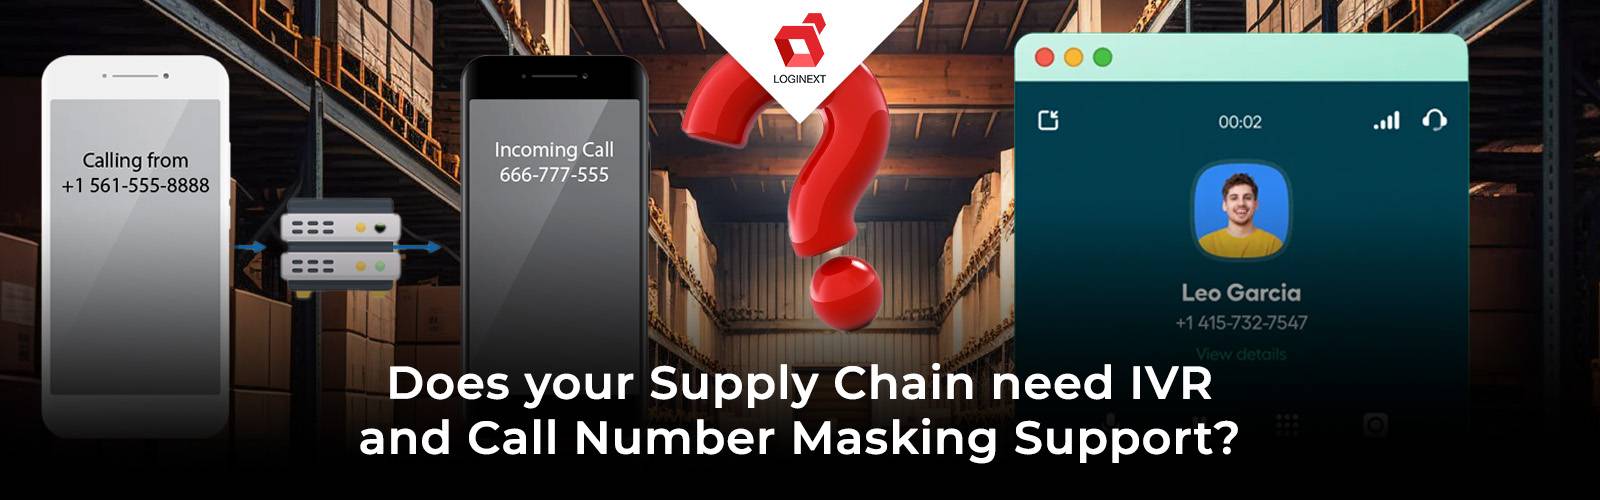 Does your Supply Chain need IVR and Call Number Masking Support?